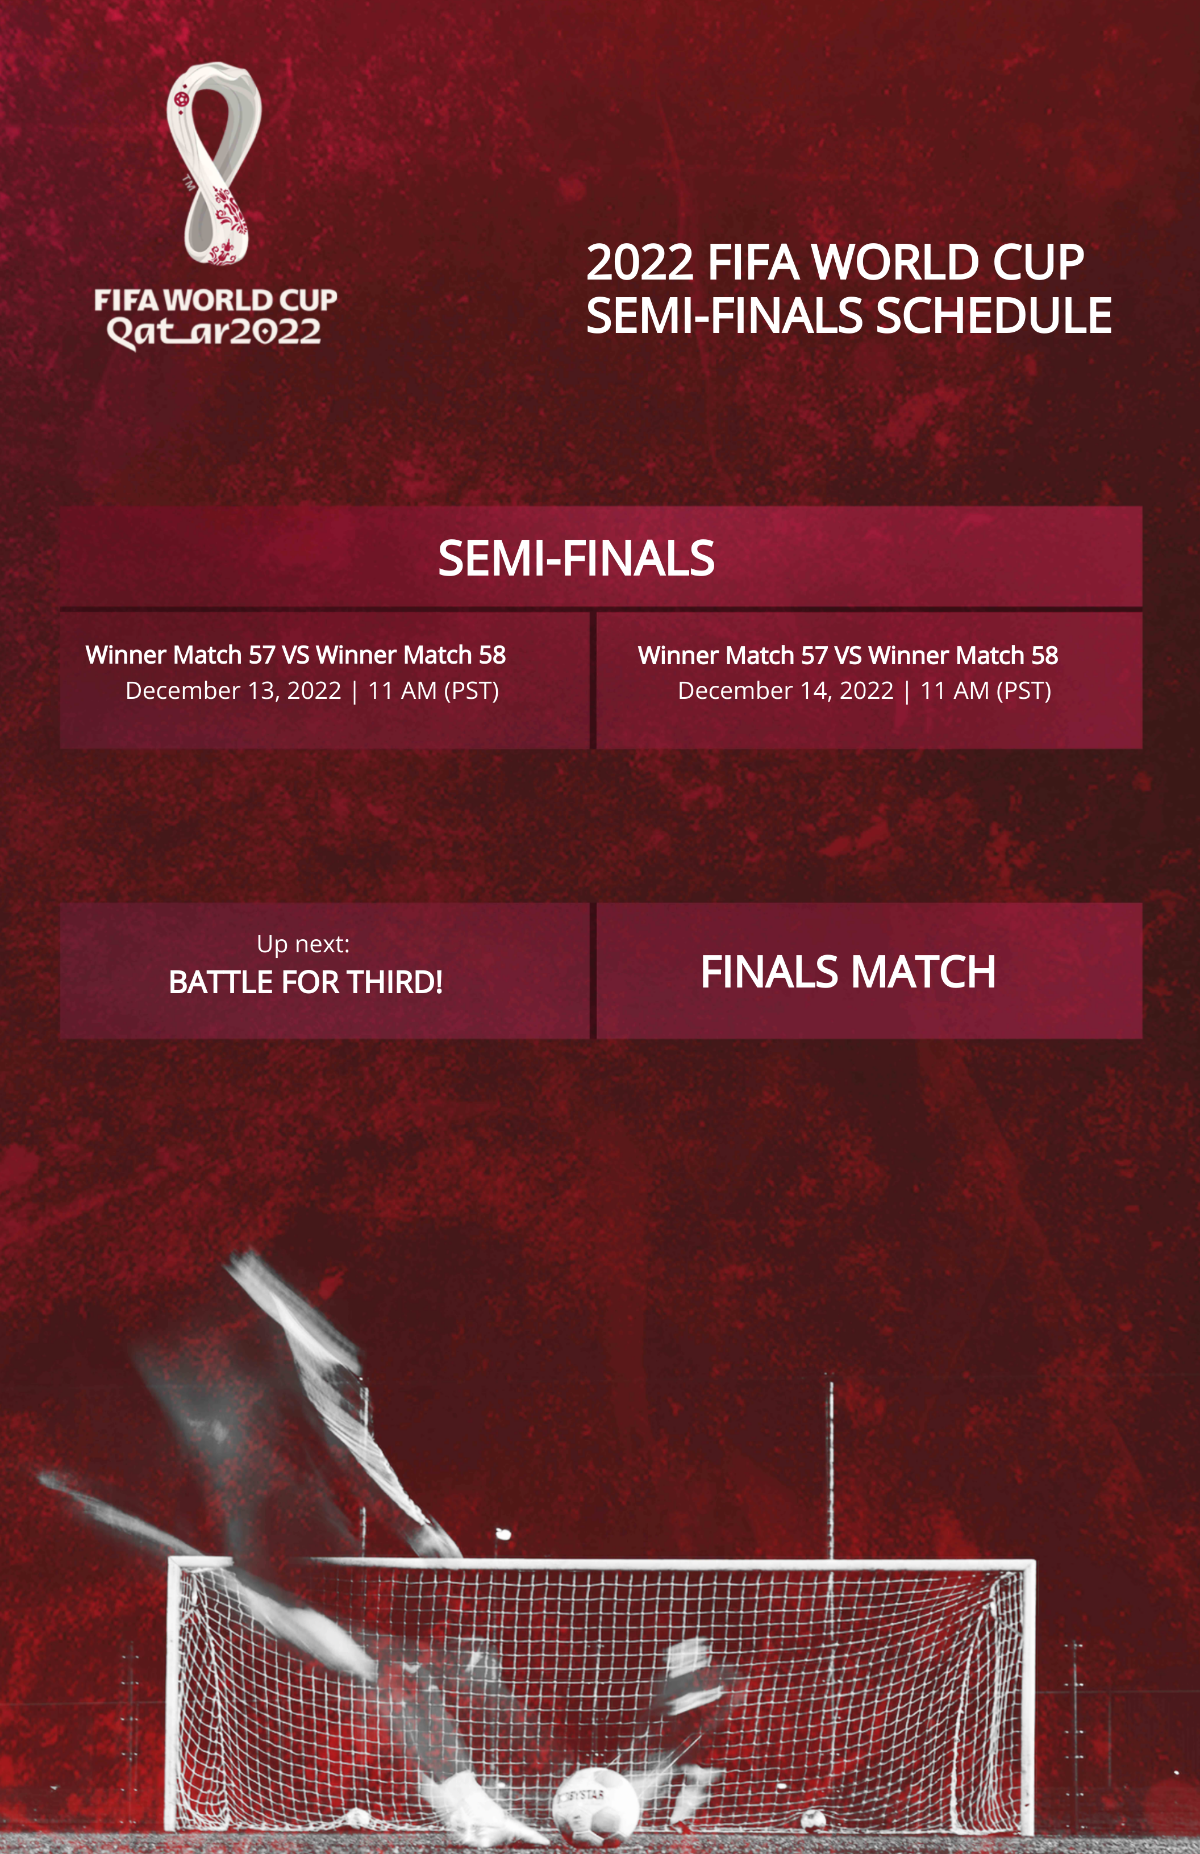 FIFA World Cup 2022 Semi-Finals Schedule Poster Template